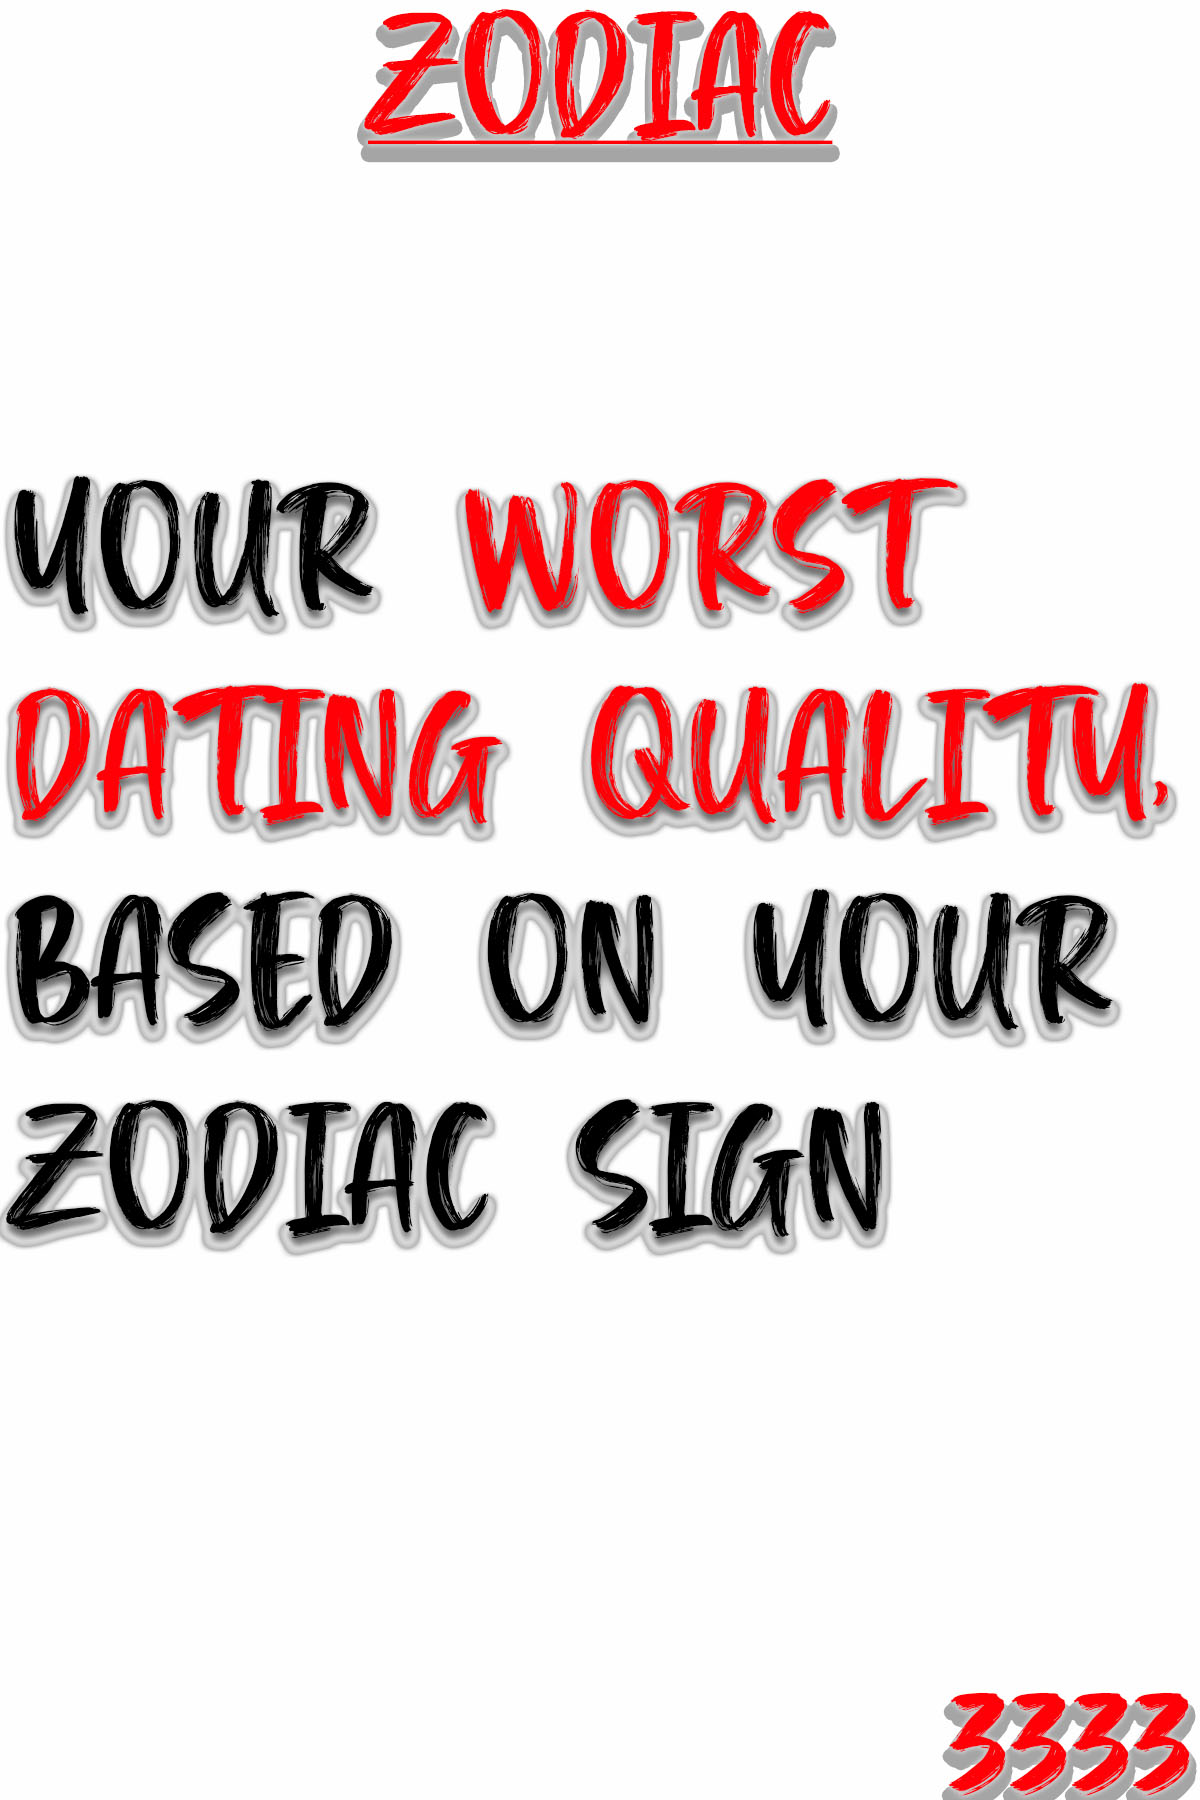 Your Worst Dating Quality, Based On Your Zodiac Sign